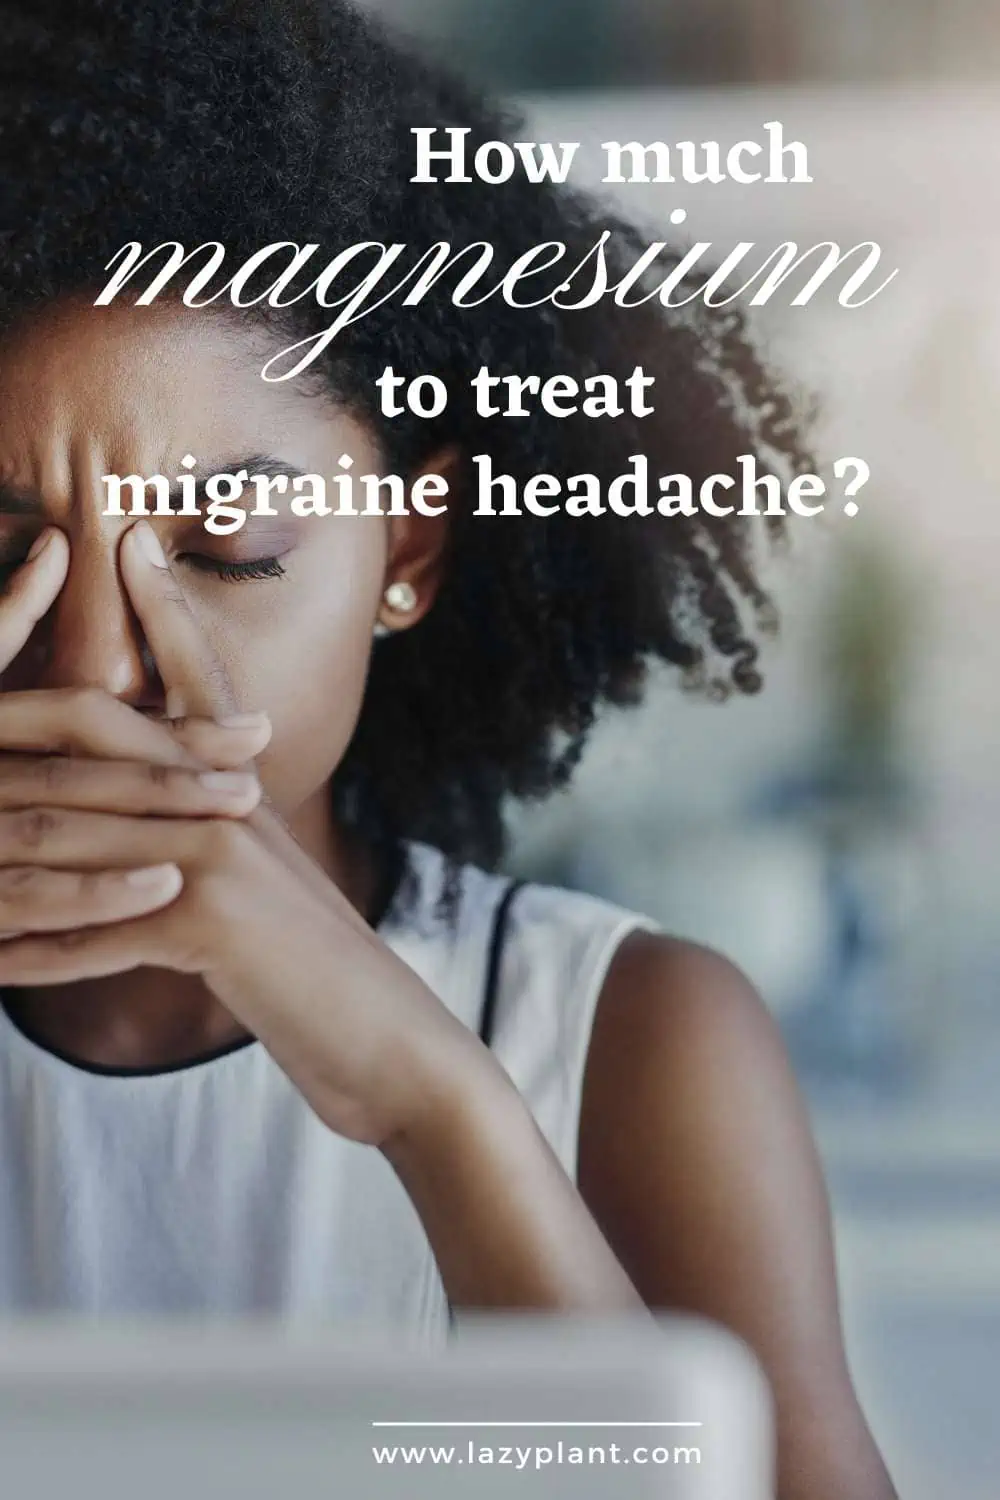 How much magnesium do I need to fight headaches?